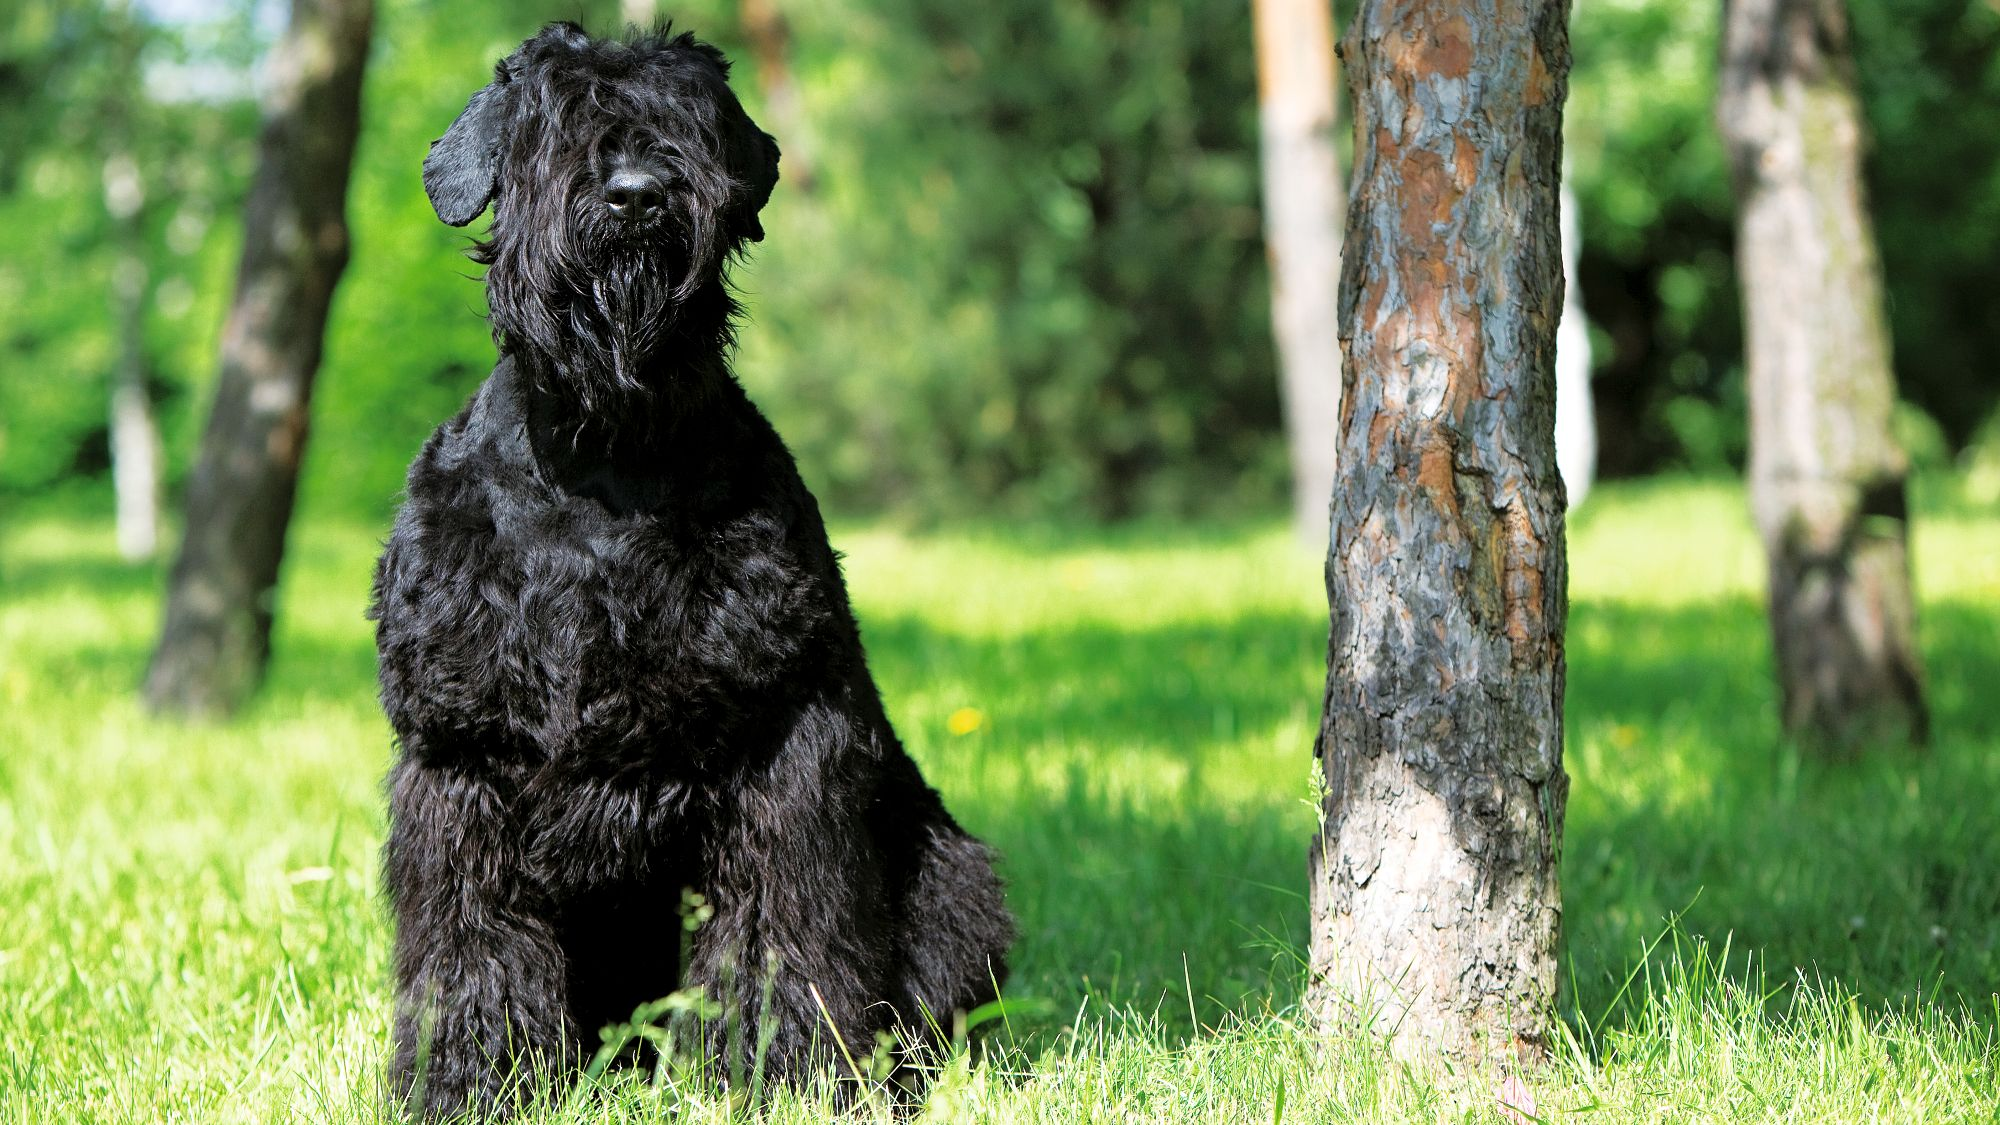 Black Russian Terrier sitting next to a tree